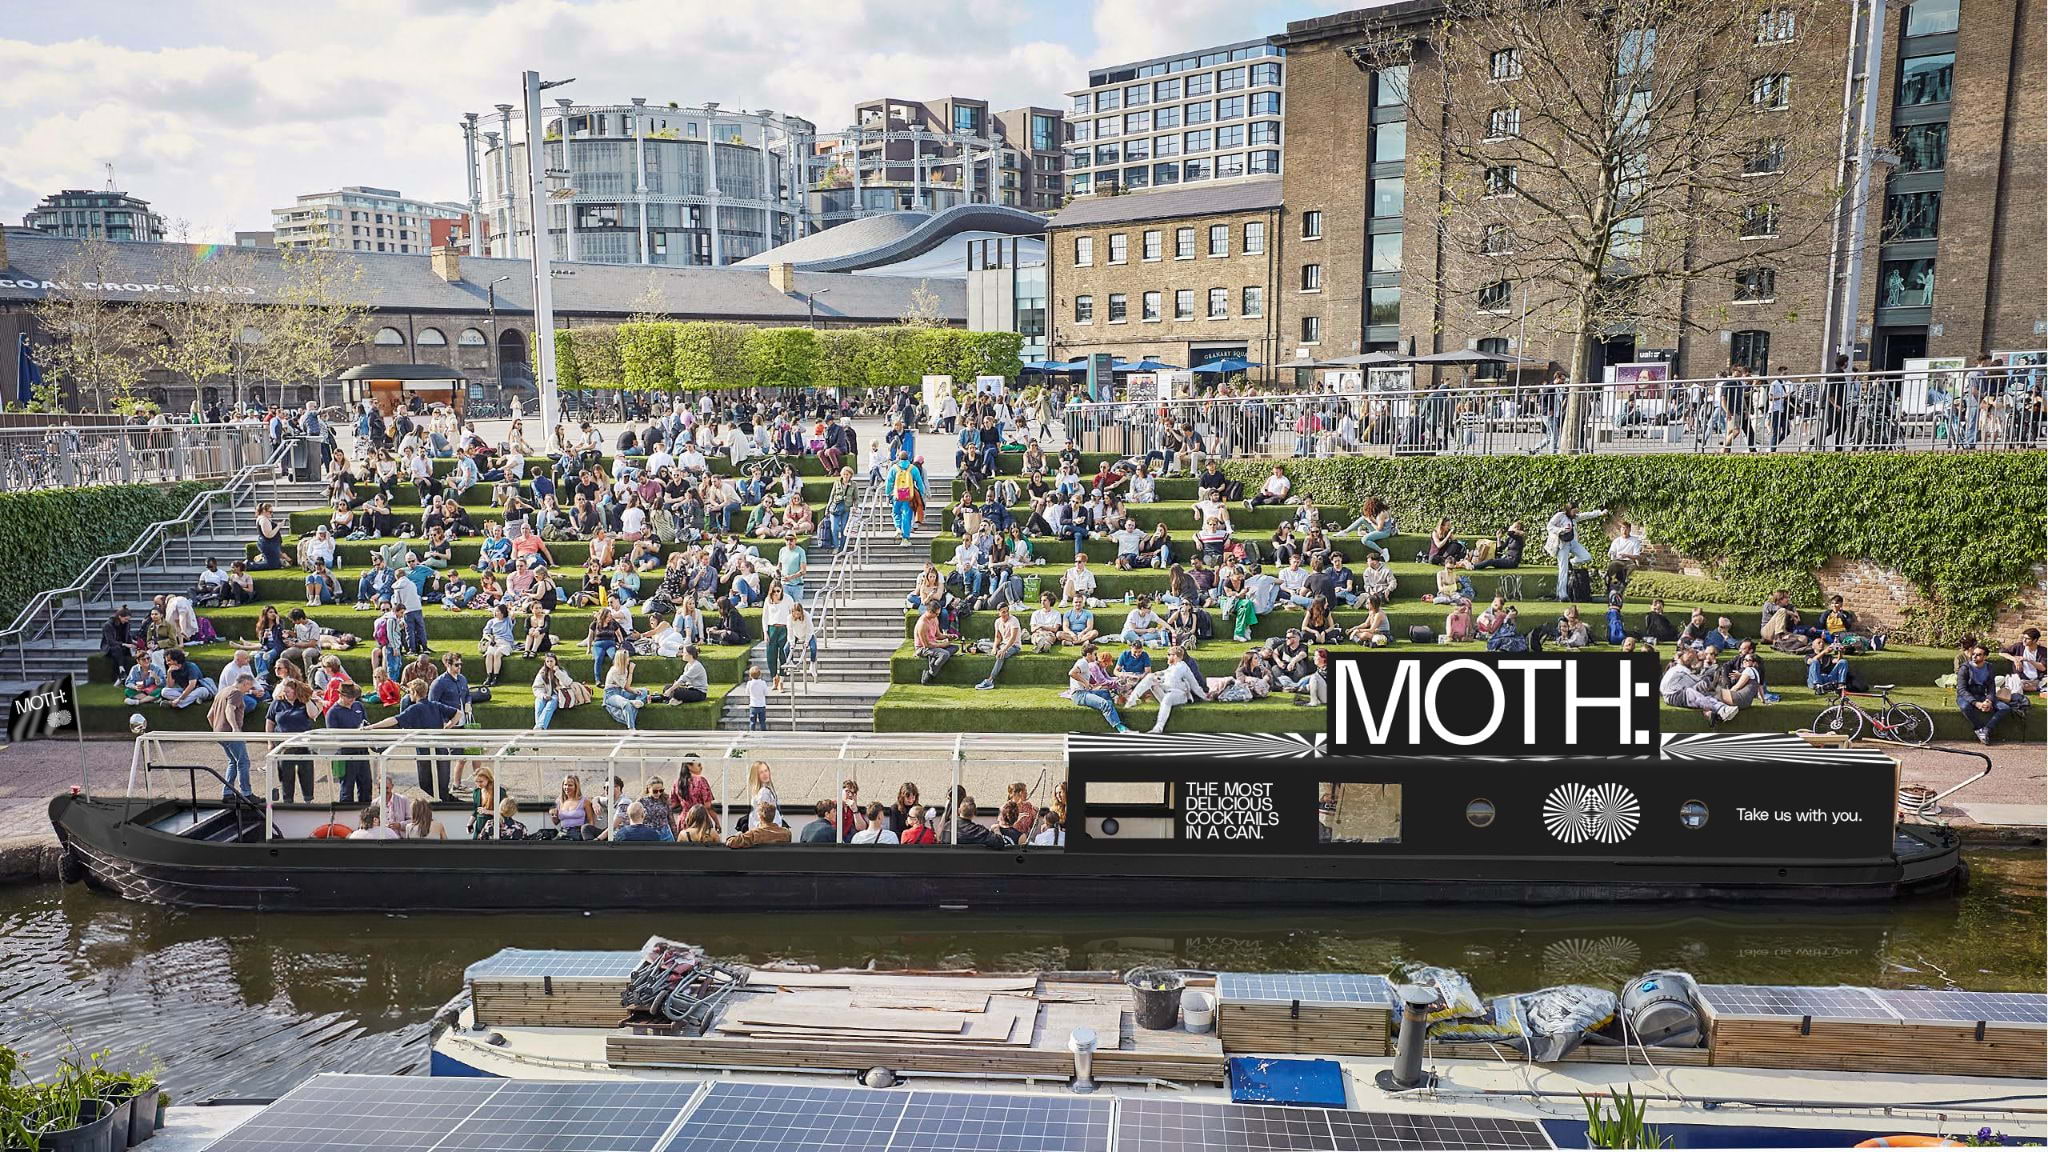 MOTH is giving away 1,000 margaritas from a King's Cross canal boat this June